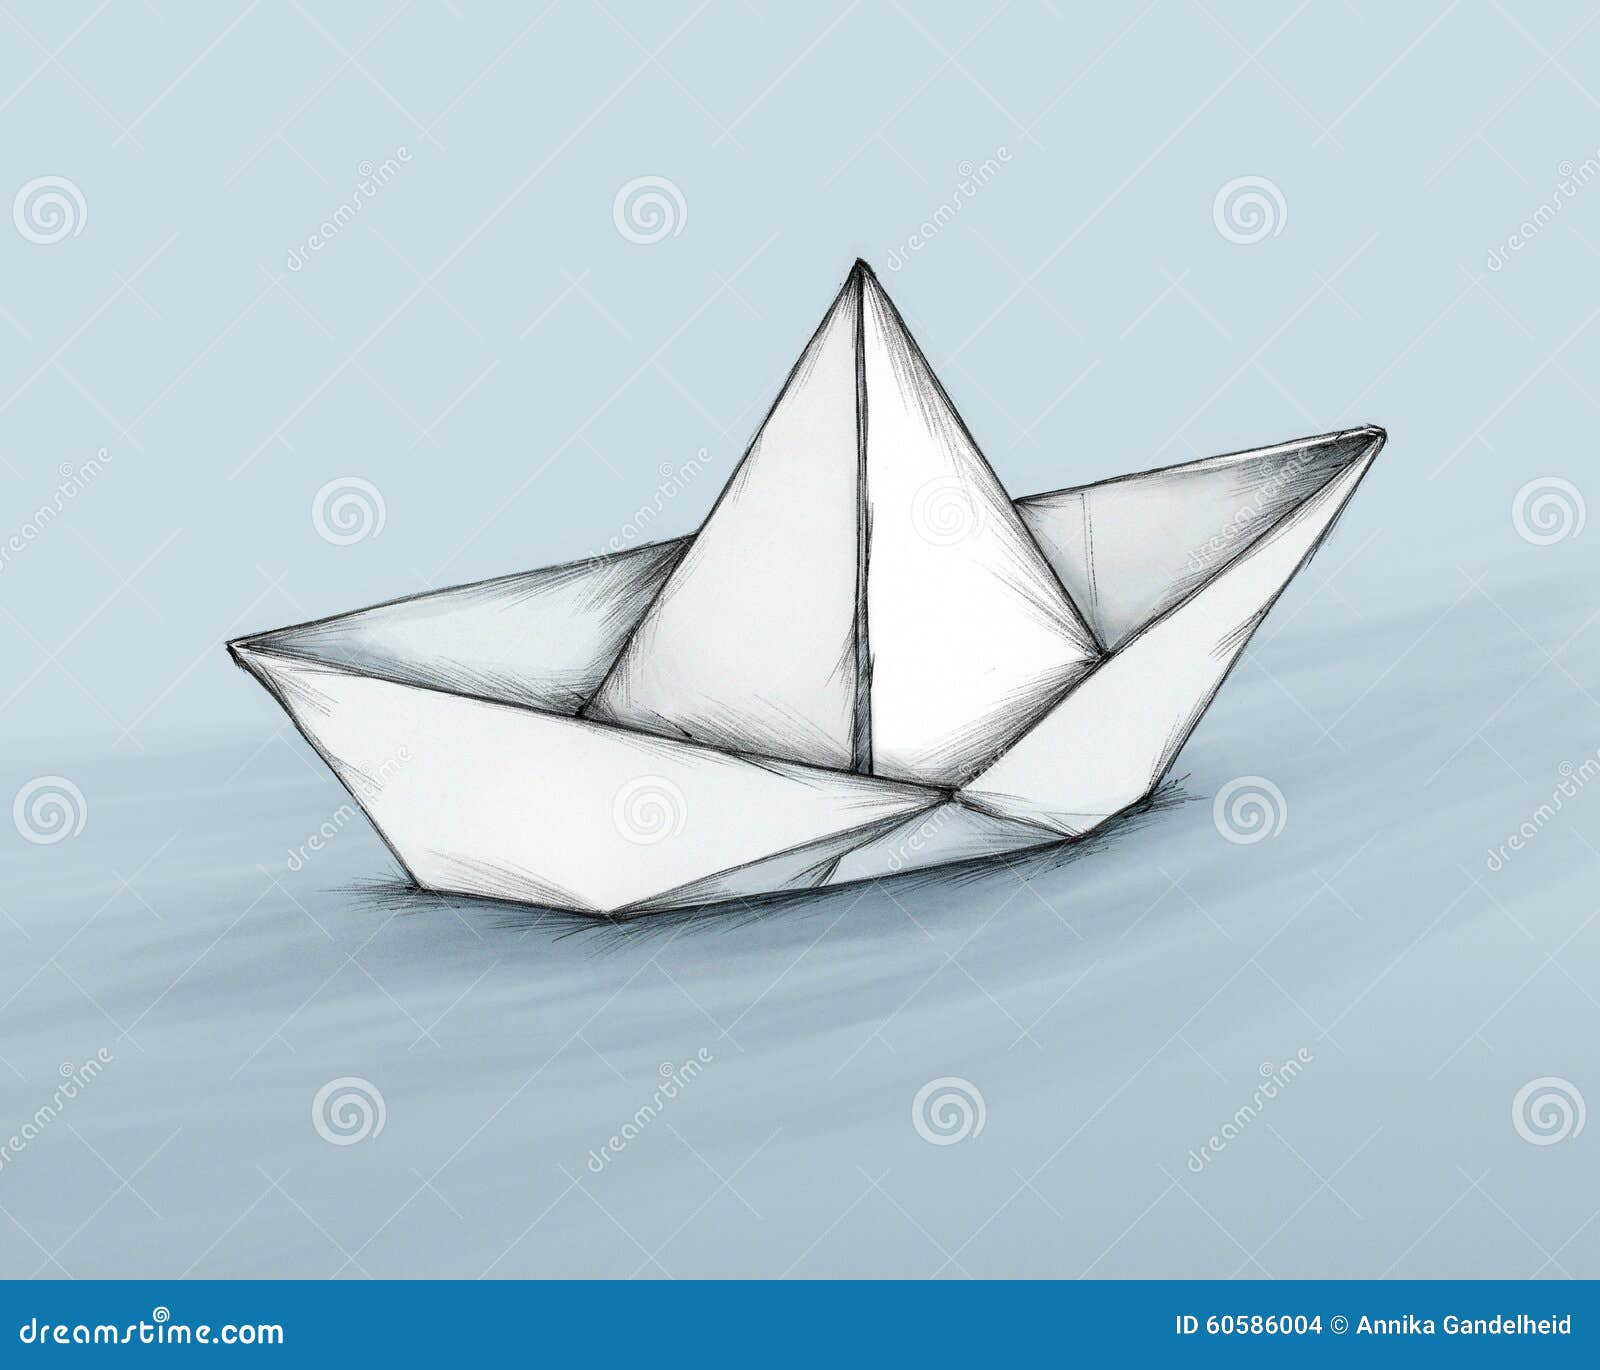 Simple Paper Boat Stock Illustration - Image: 60586004